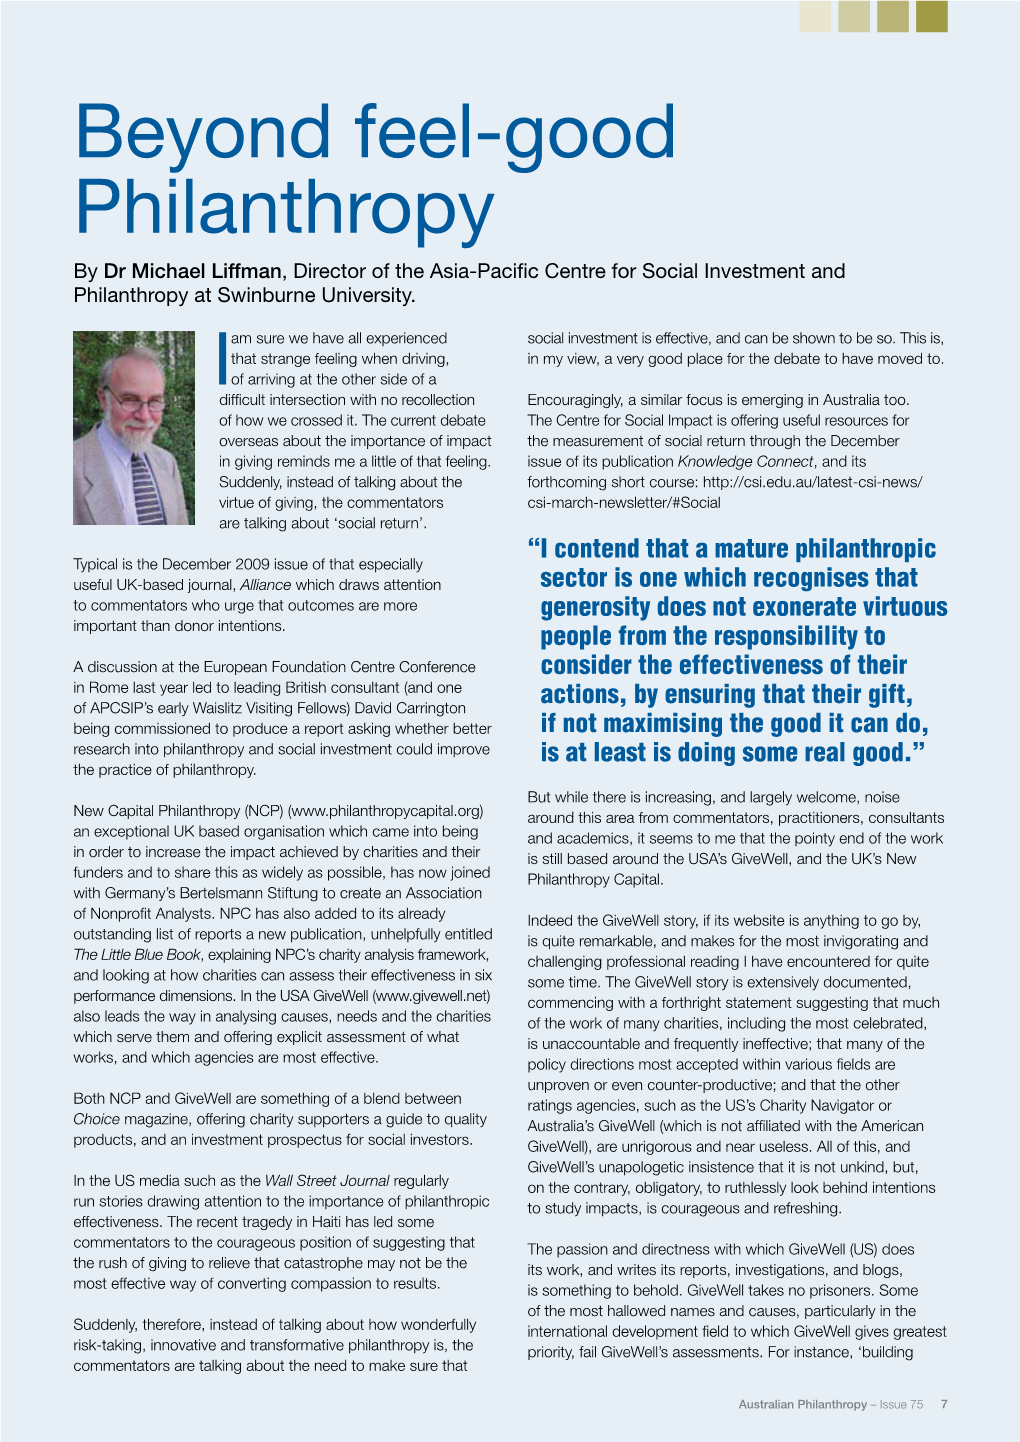 Beyond Feel-Good Philanthropy by Dr Michael Liffman, Director of the Asia-Pacific Centre for Social Investment and Philanthropy at Swinburne University